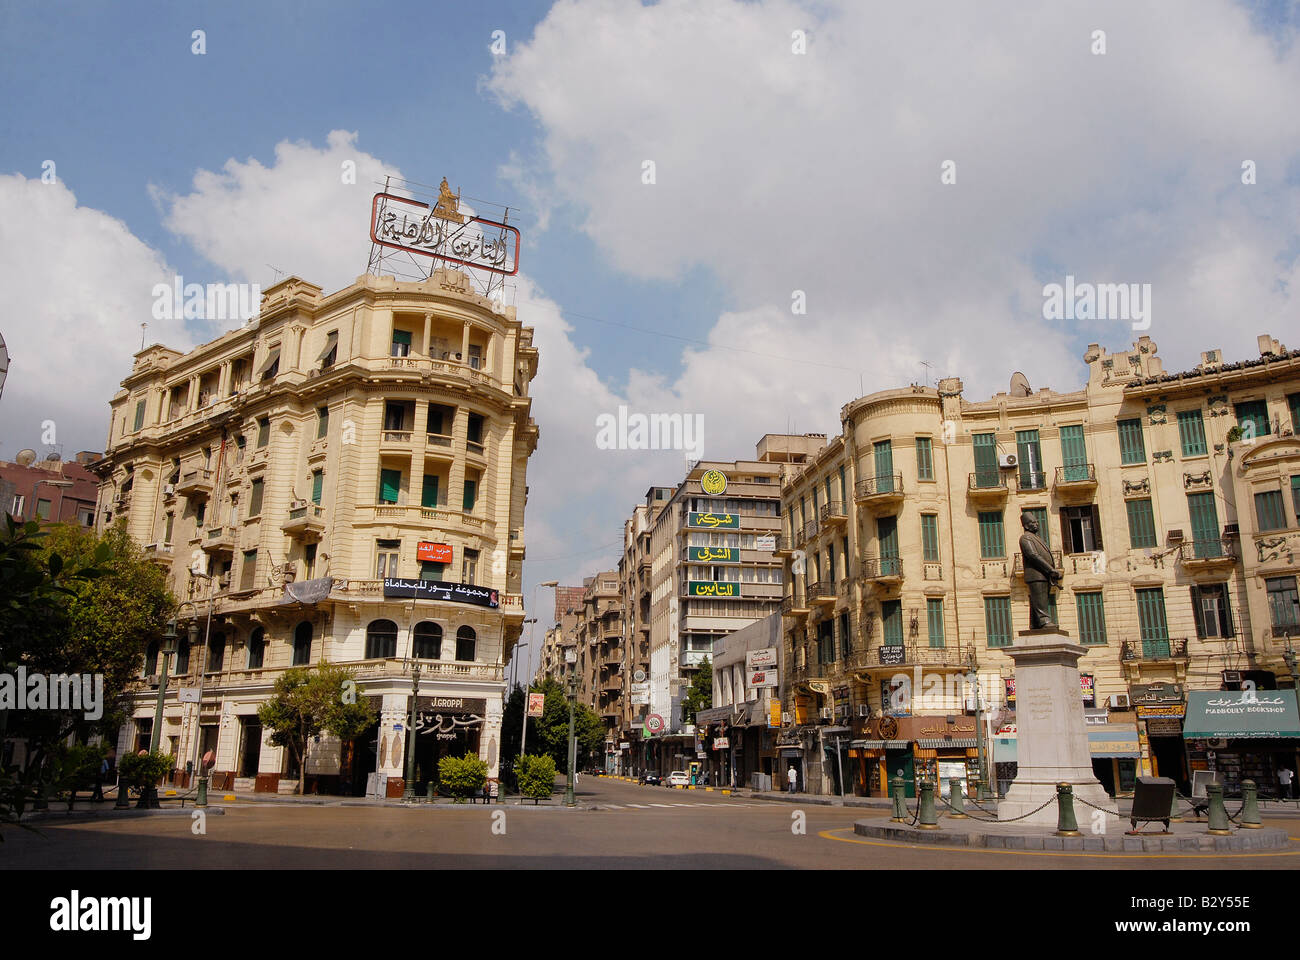 Cairo's downtown is shaped by art deco and colonial architecture. Here wellknown coffeehouse Groppi at Talaat Harb Square Stock Photo